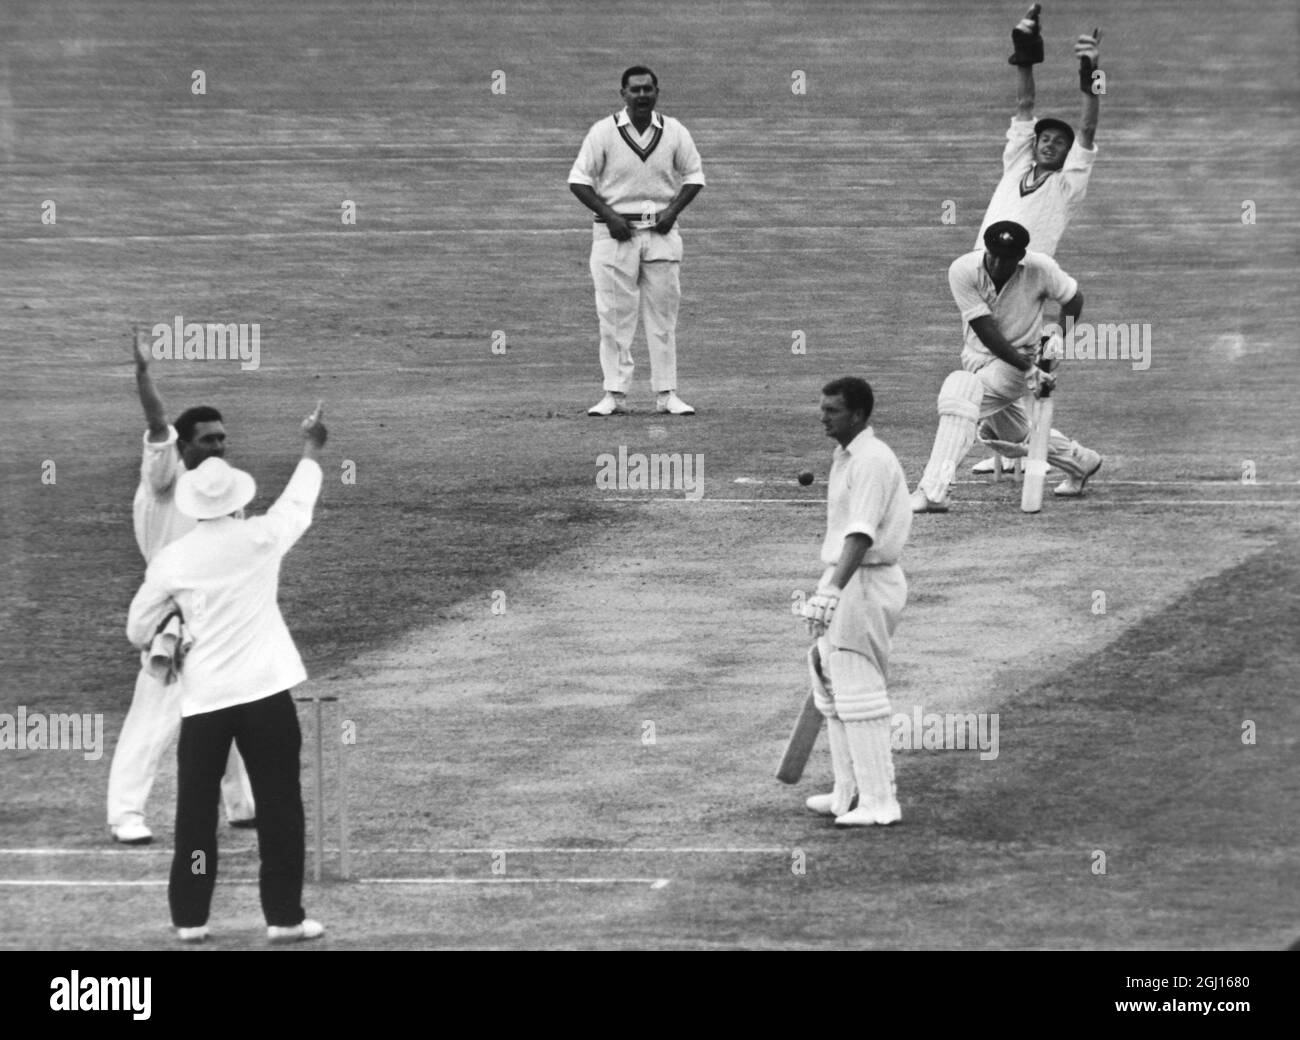 19 FEBRUARY 1963 FRED TITMUS TRAPS PETER BURGE LBW FOR 103 DURING THE 5TH ASHES TEST MATCH, MCC VS AUSTRALIA, SYDNEY, AUSTRALIA. Stock Photo